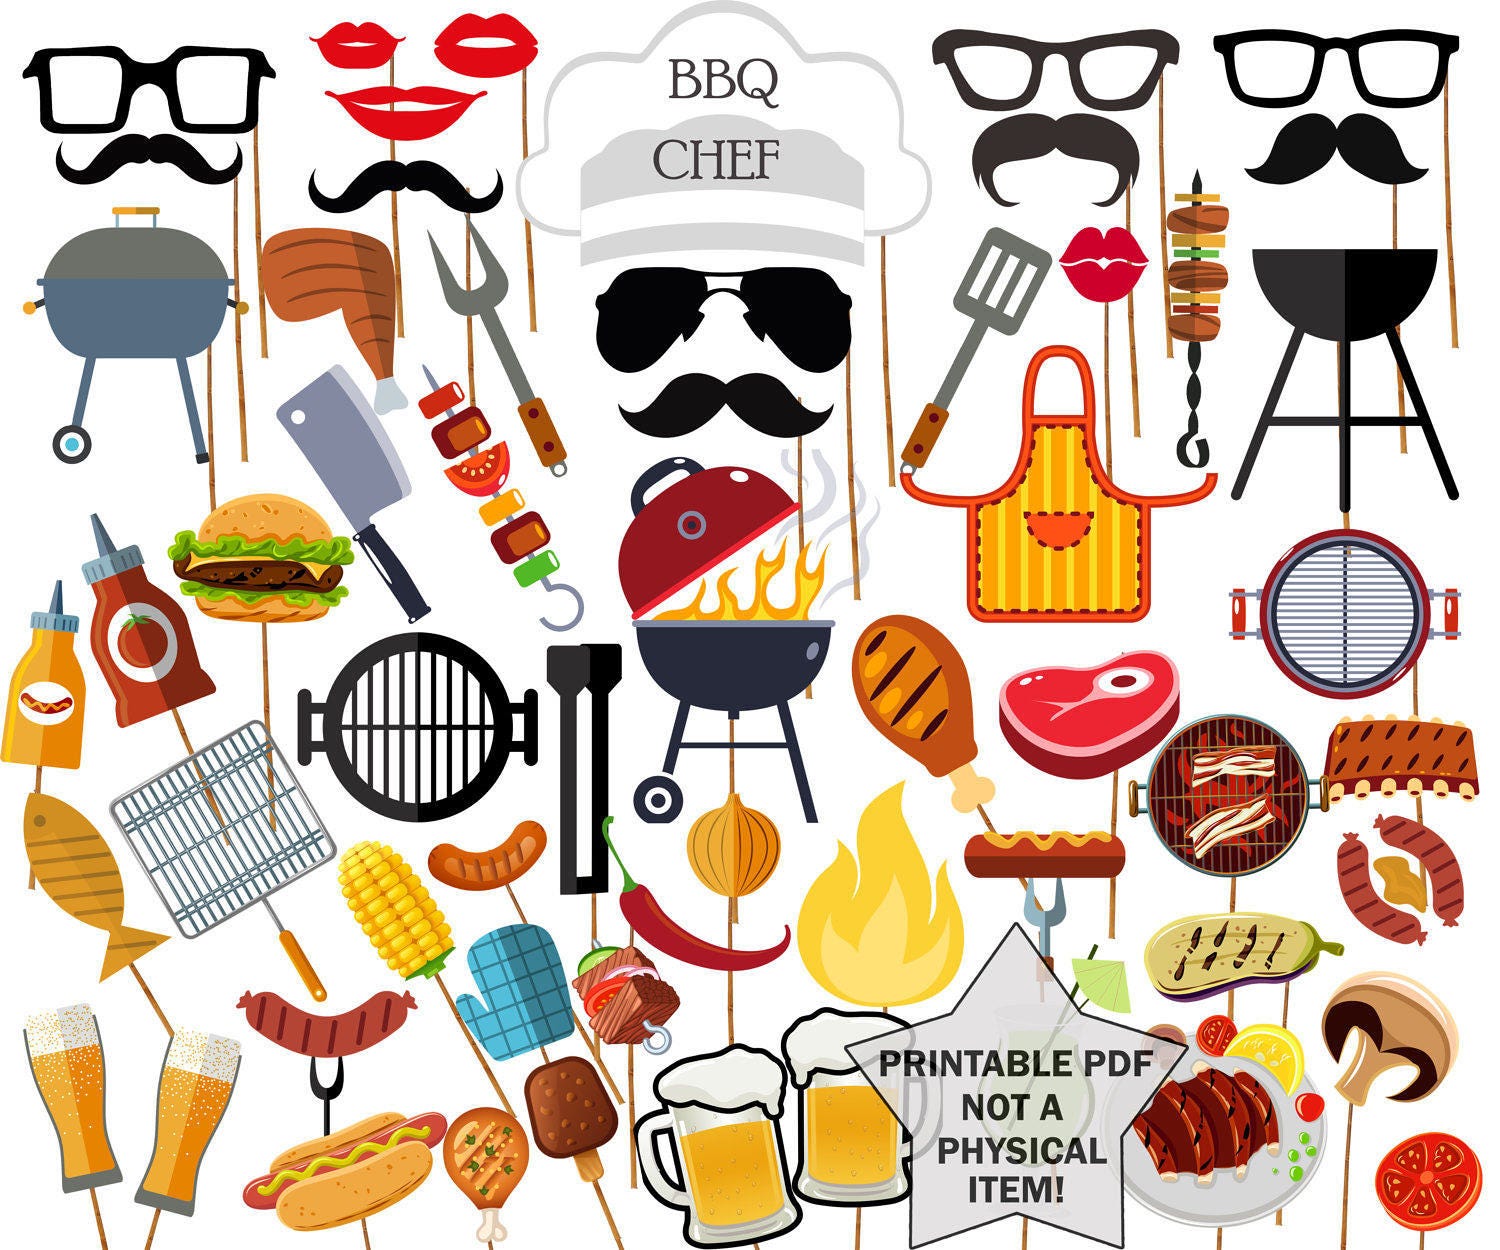 siv guide stakåndet BBQ Party Photo Booth Prop: party Props Barbecue - Etsy